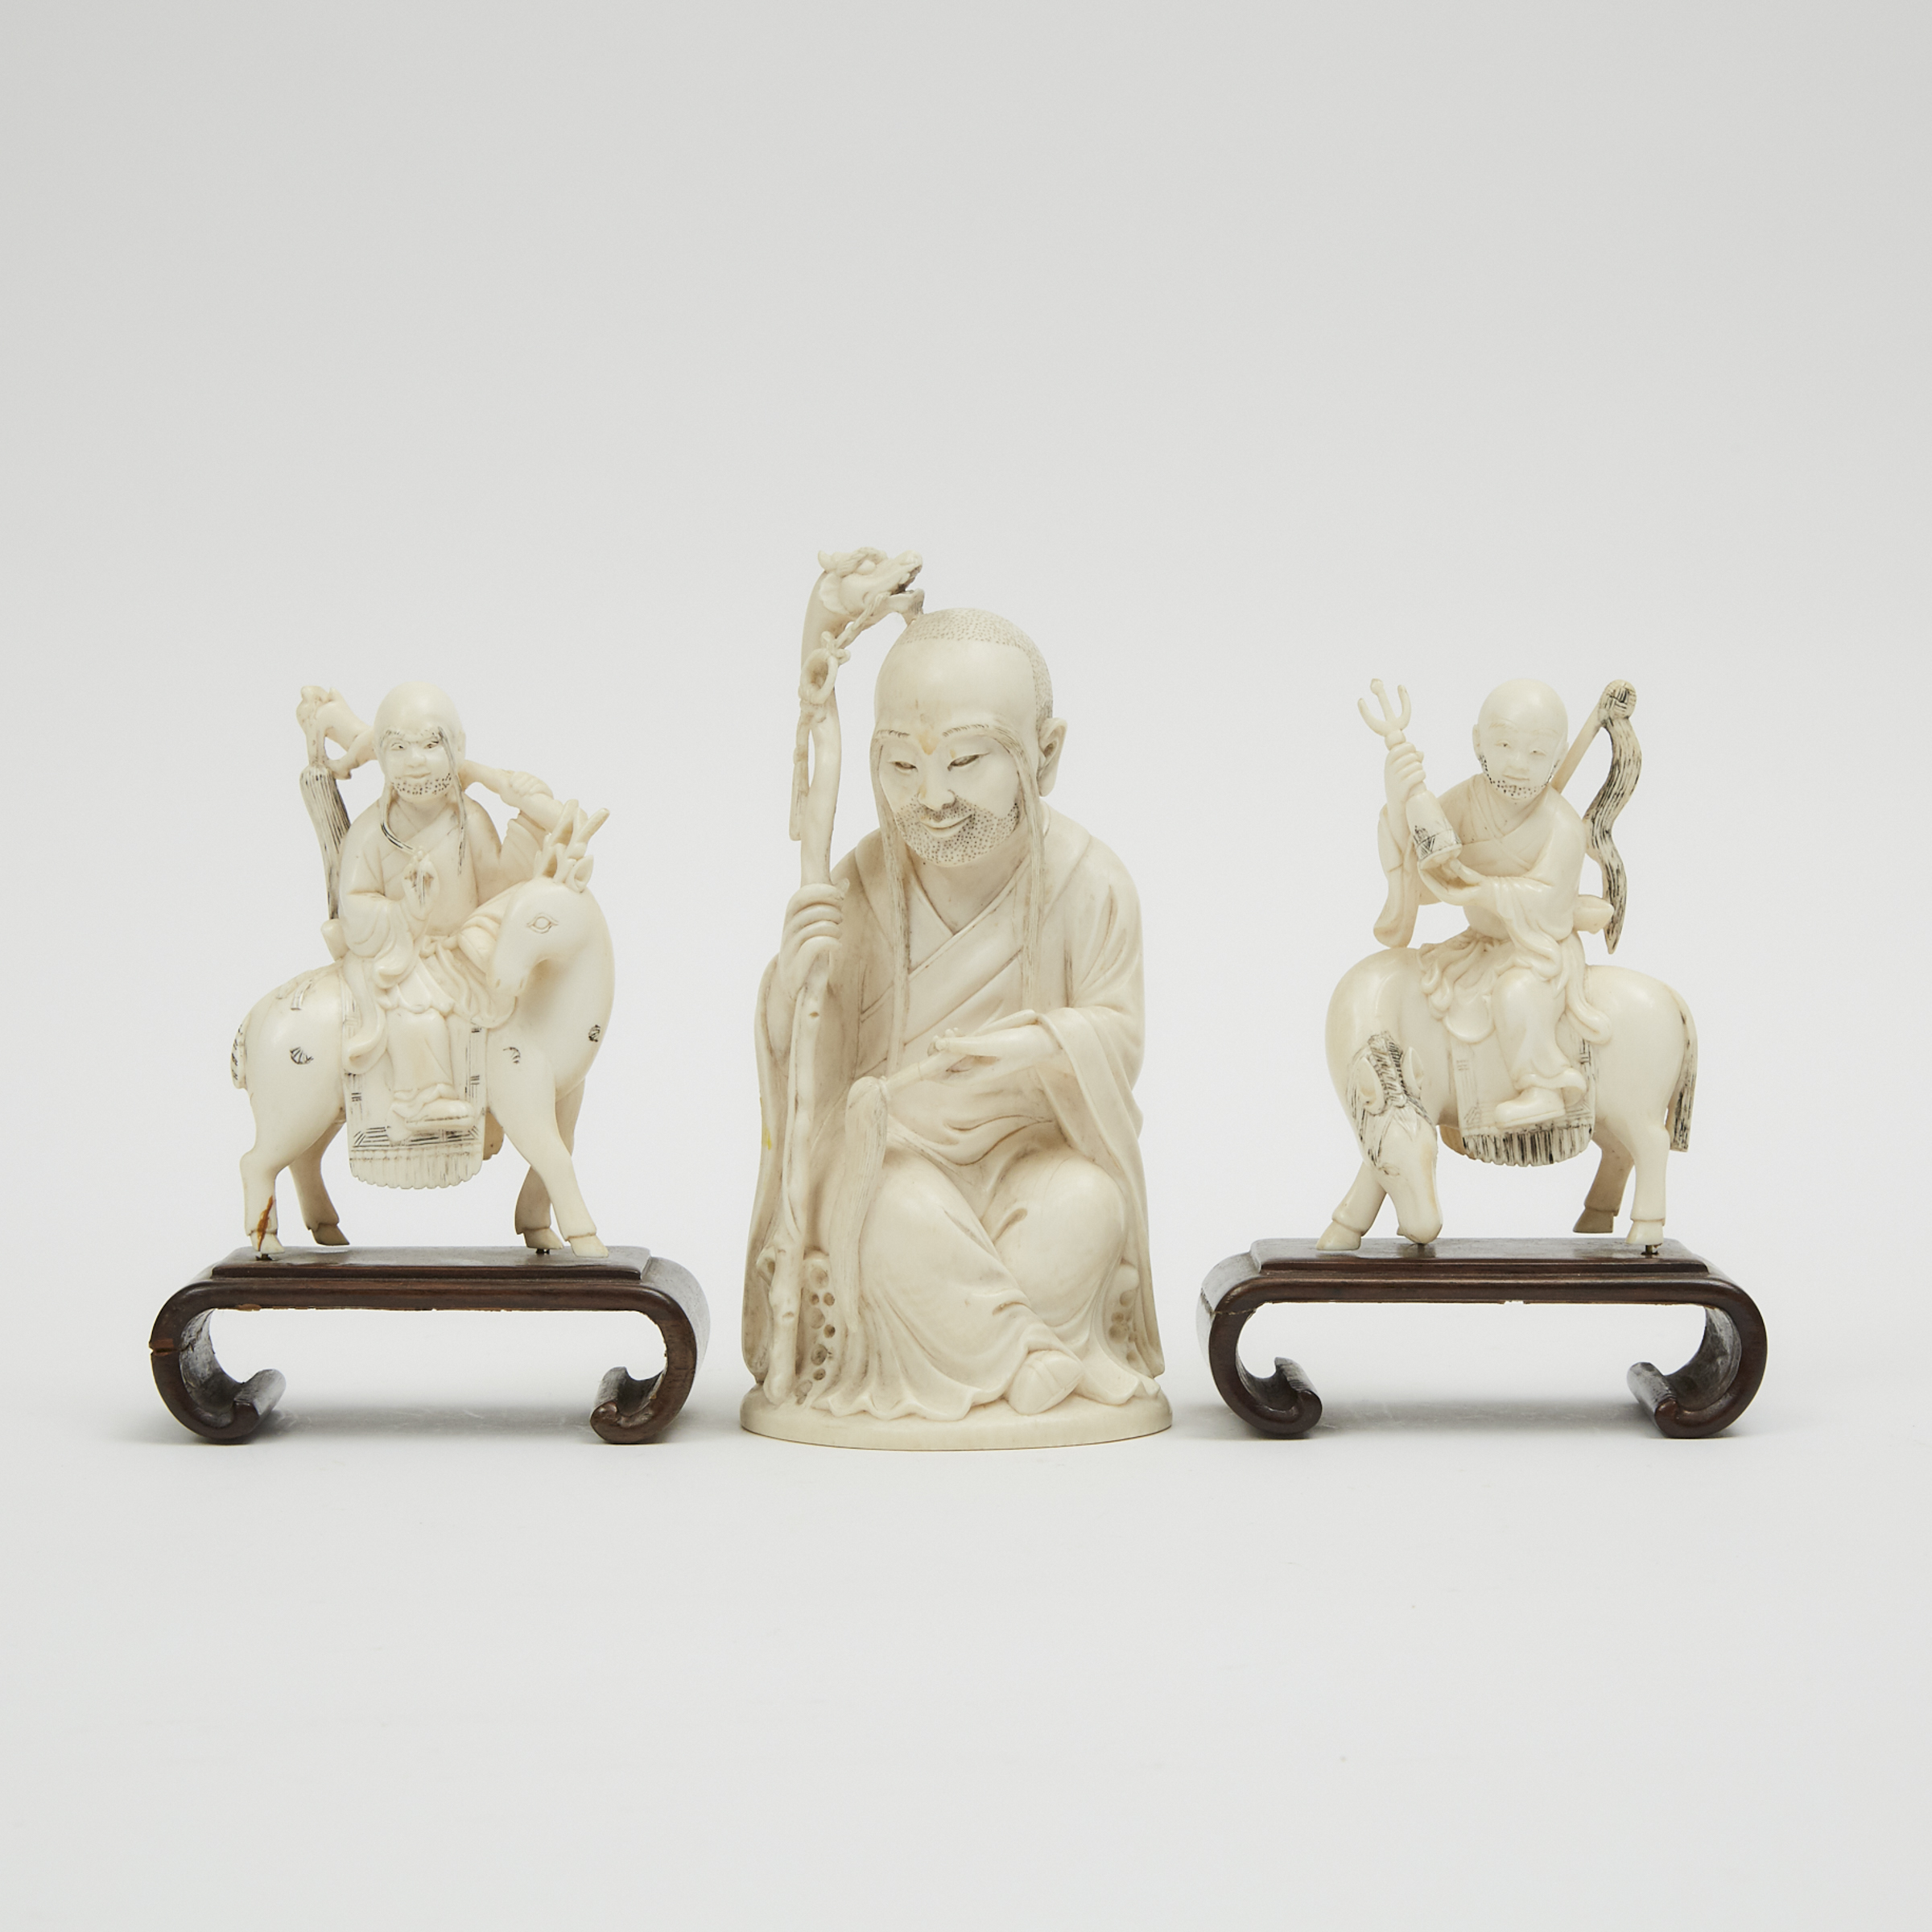 A Group of Three Chinese Ivory Carved 'Luohan' Figures, Early 20th Century